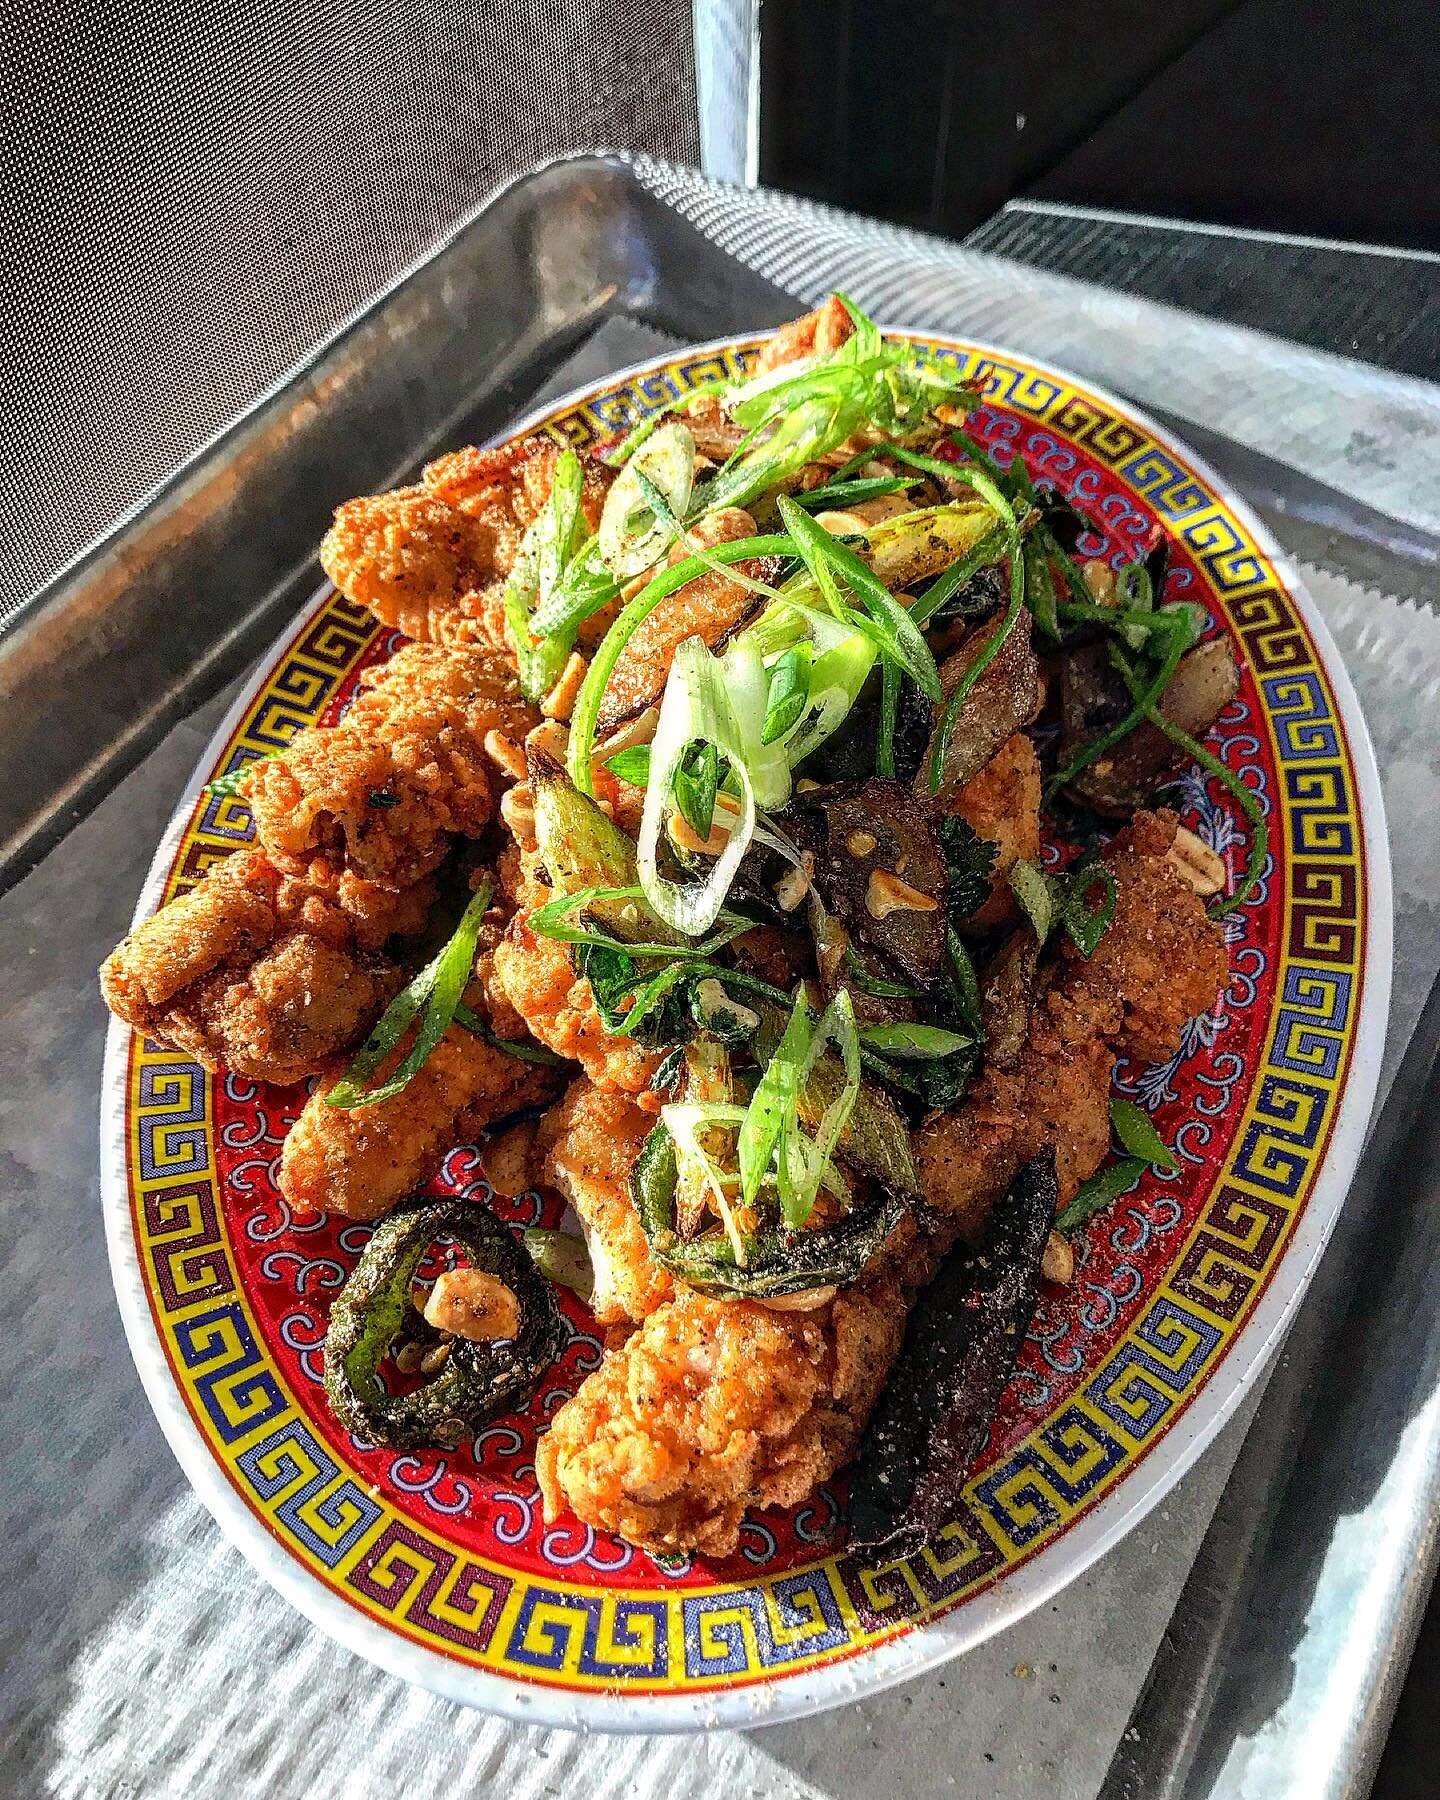 DON&rsquo;T MISS OUT ON THE GOOD SHIT!! ***Click link in bio and sign up for our mailing list***

Uncle&rsquo;s Special Mala Chicken

-Crispy crunchy Bell &amp; Evans chicken thigh
-Caramelized jalape&ntilde;o, celery and onion 
-Cilantro 
-Peanuts 
